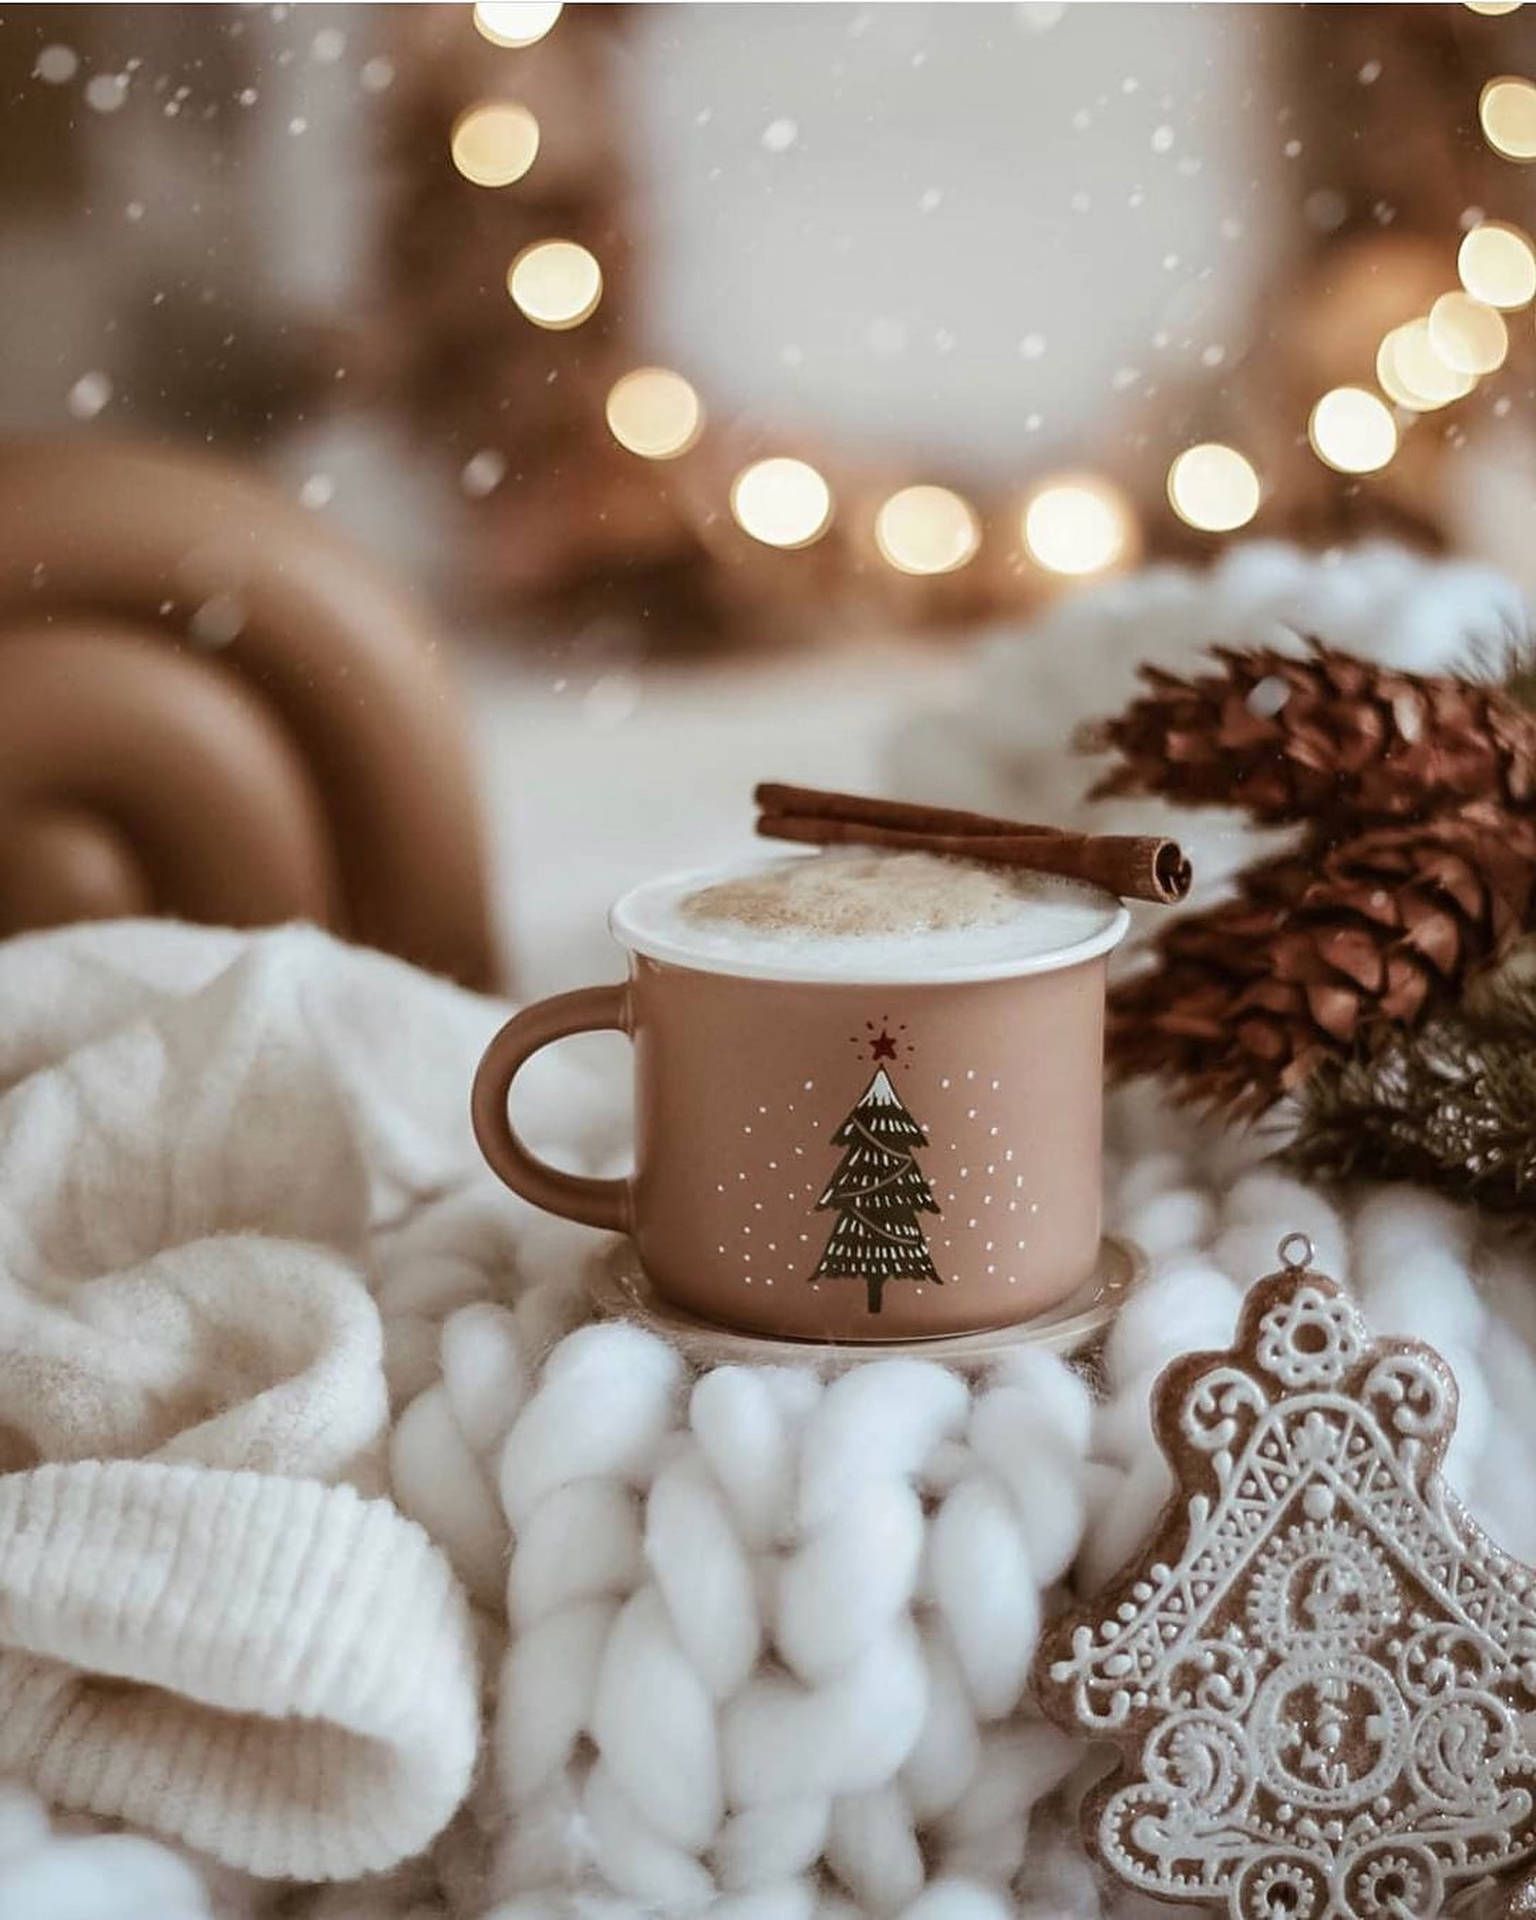 A cup of hot chocolate with a Christmas tree on it. - Cozy, Christmas